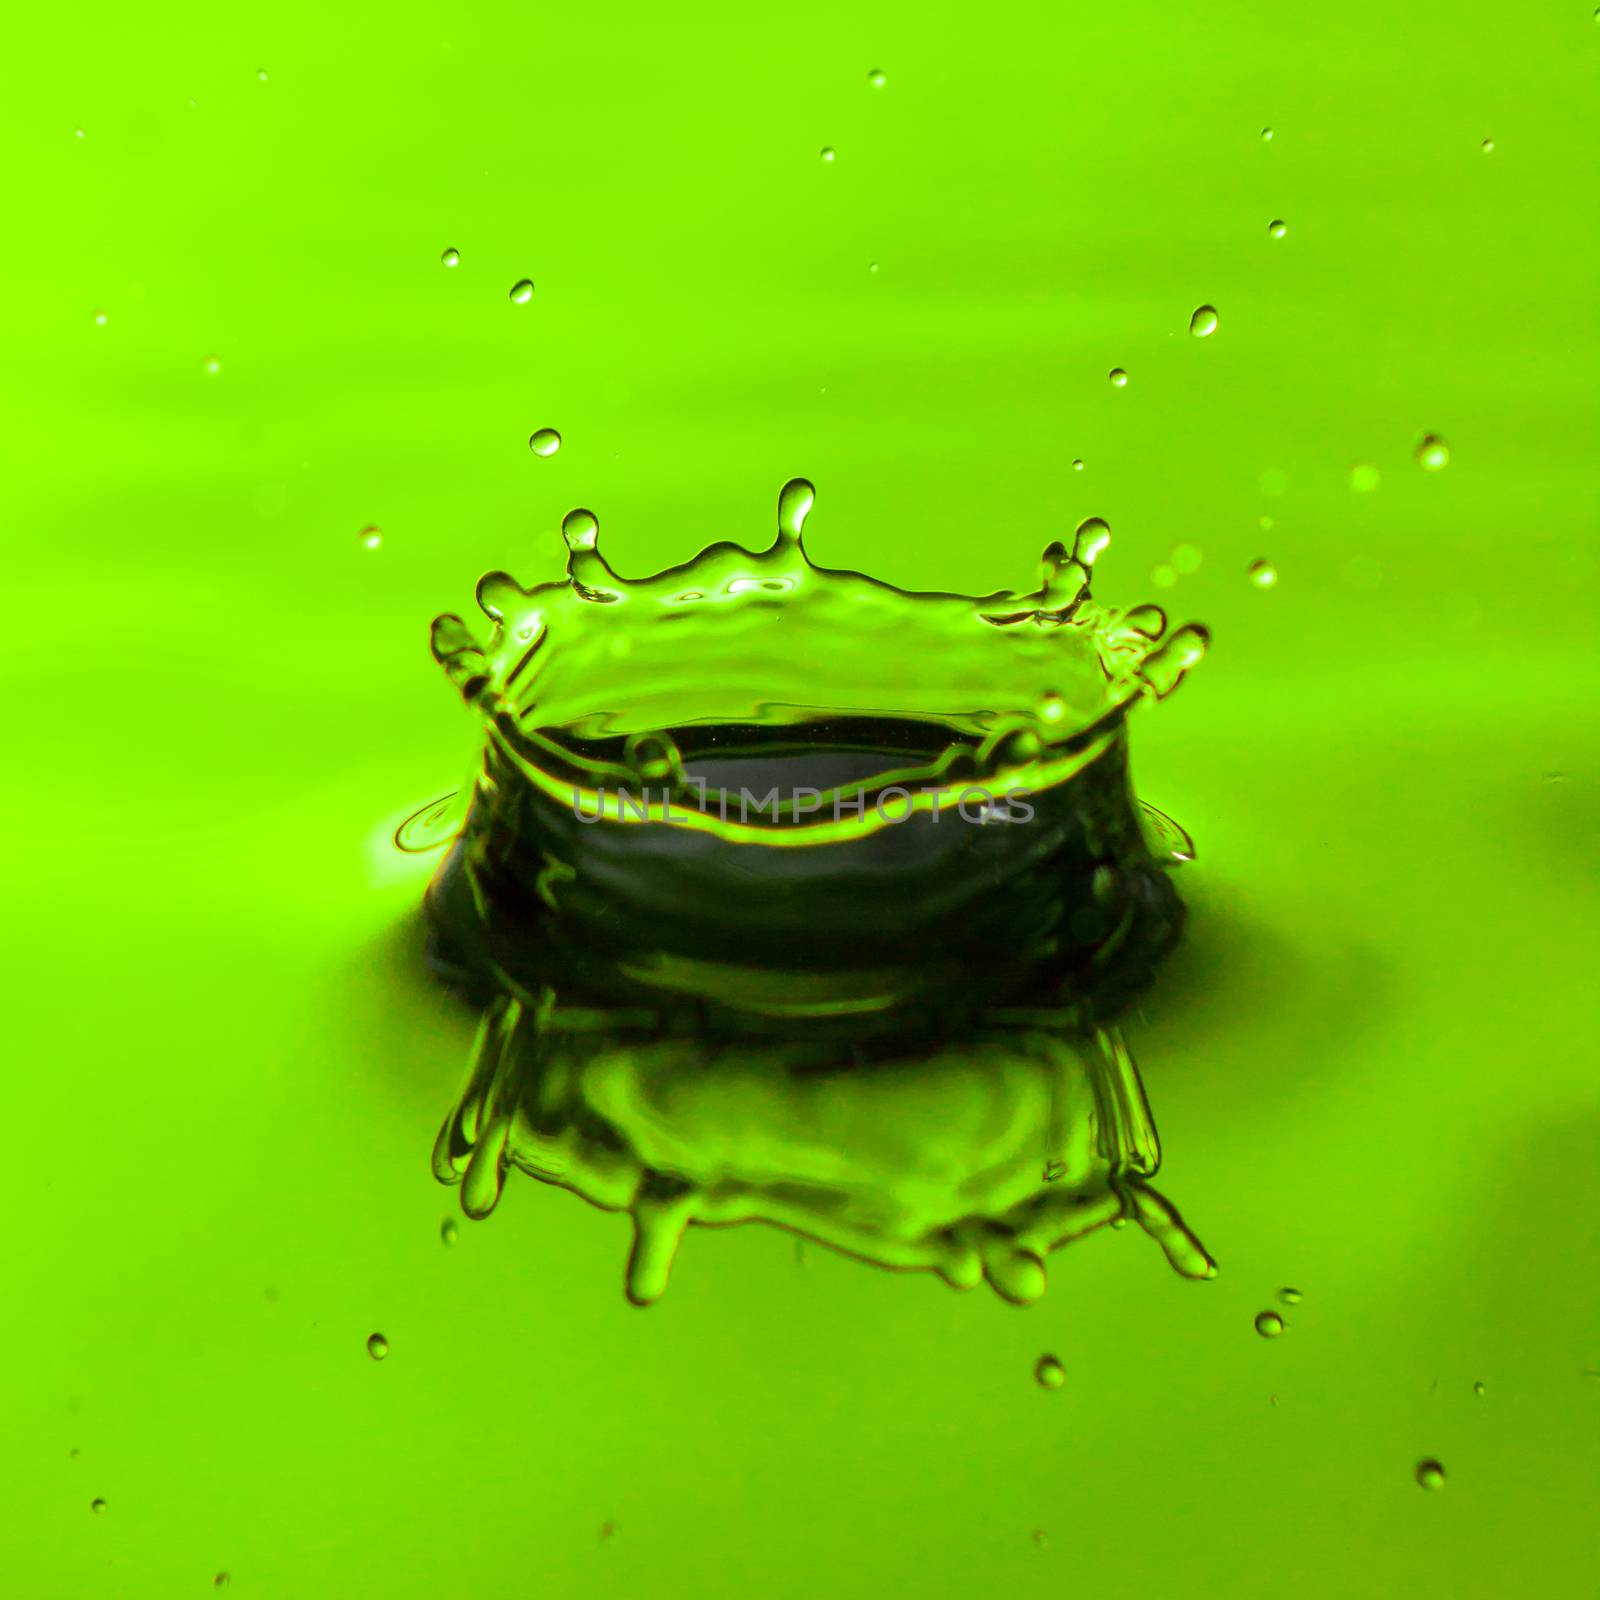 Close up of water droplet or splash-Image, green backgroung by petrsvoboda91